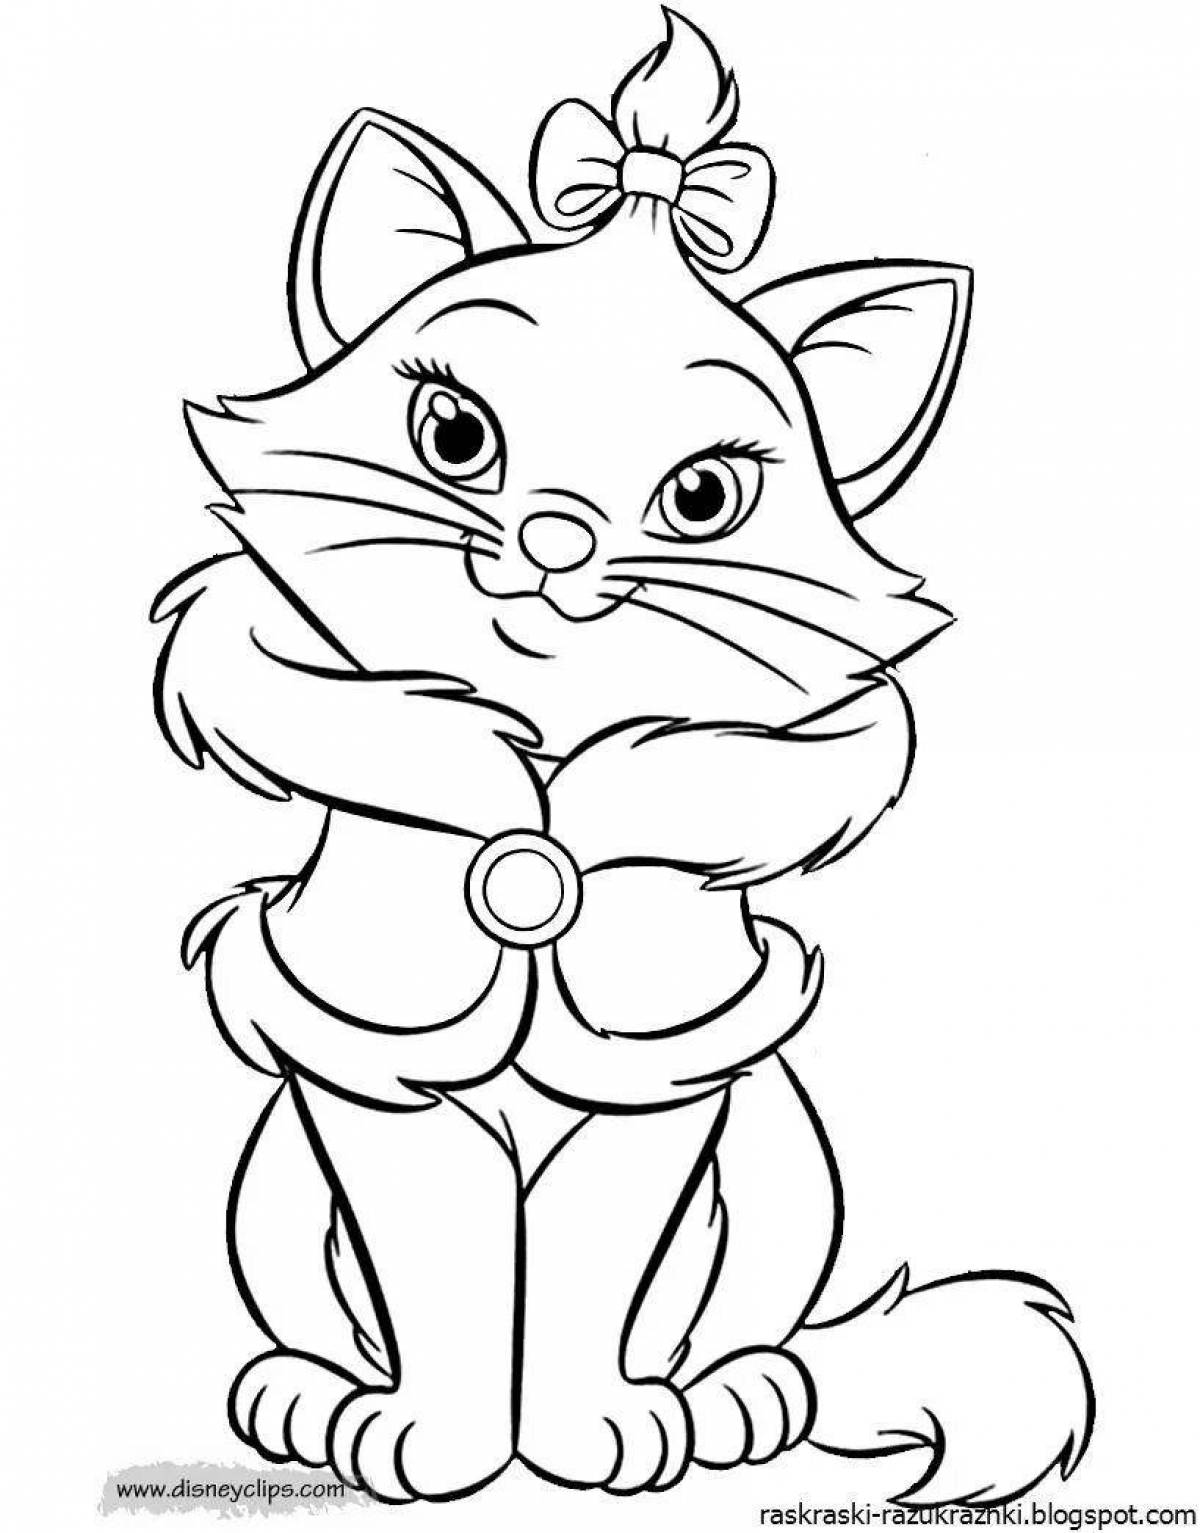 Fancy kitty coloring book for 5-6 year olds